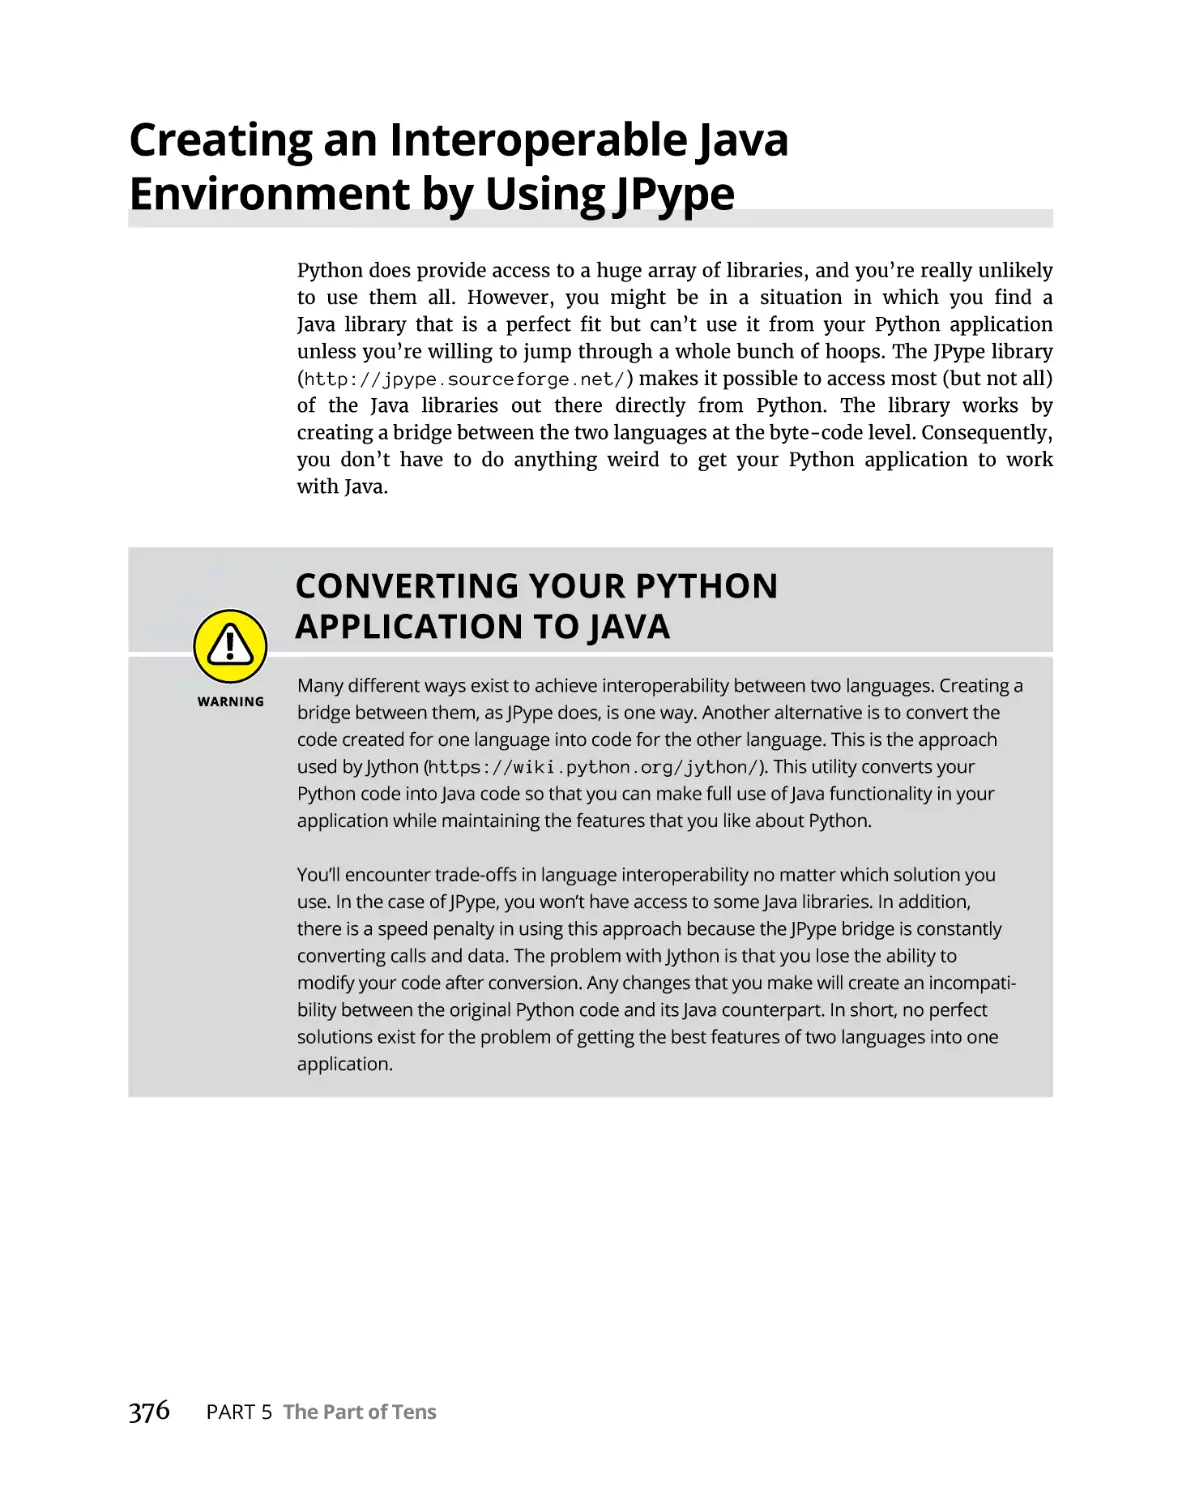 Creating an Interoperable Java Environment by Using JPype